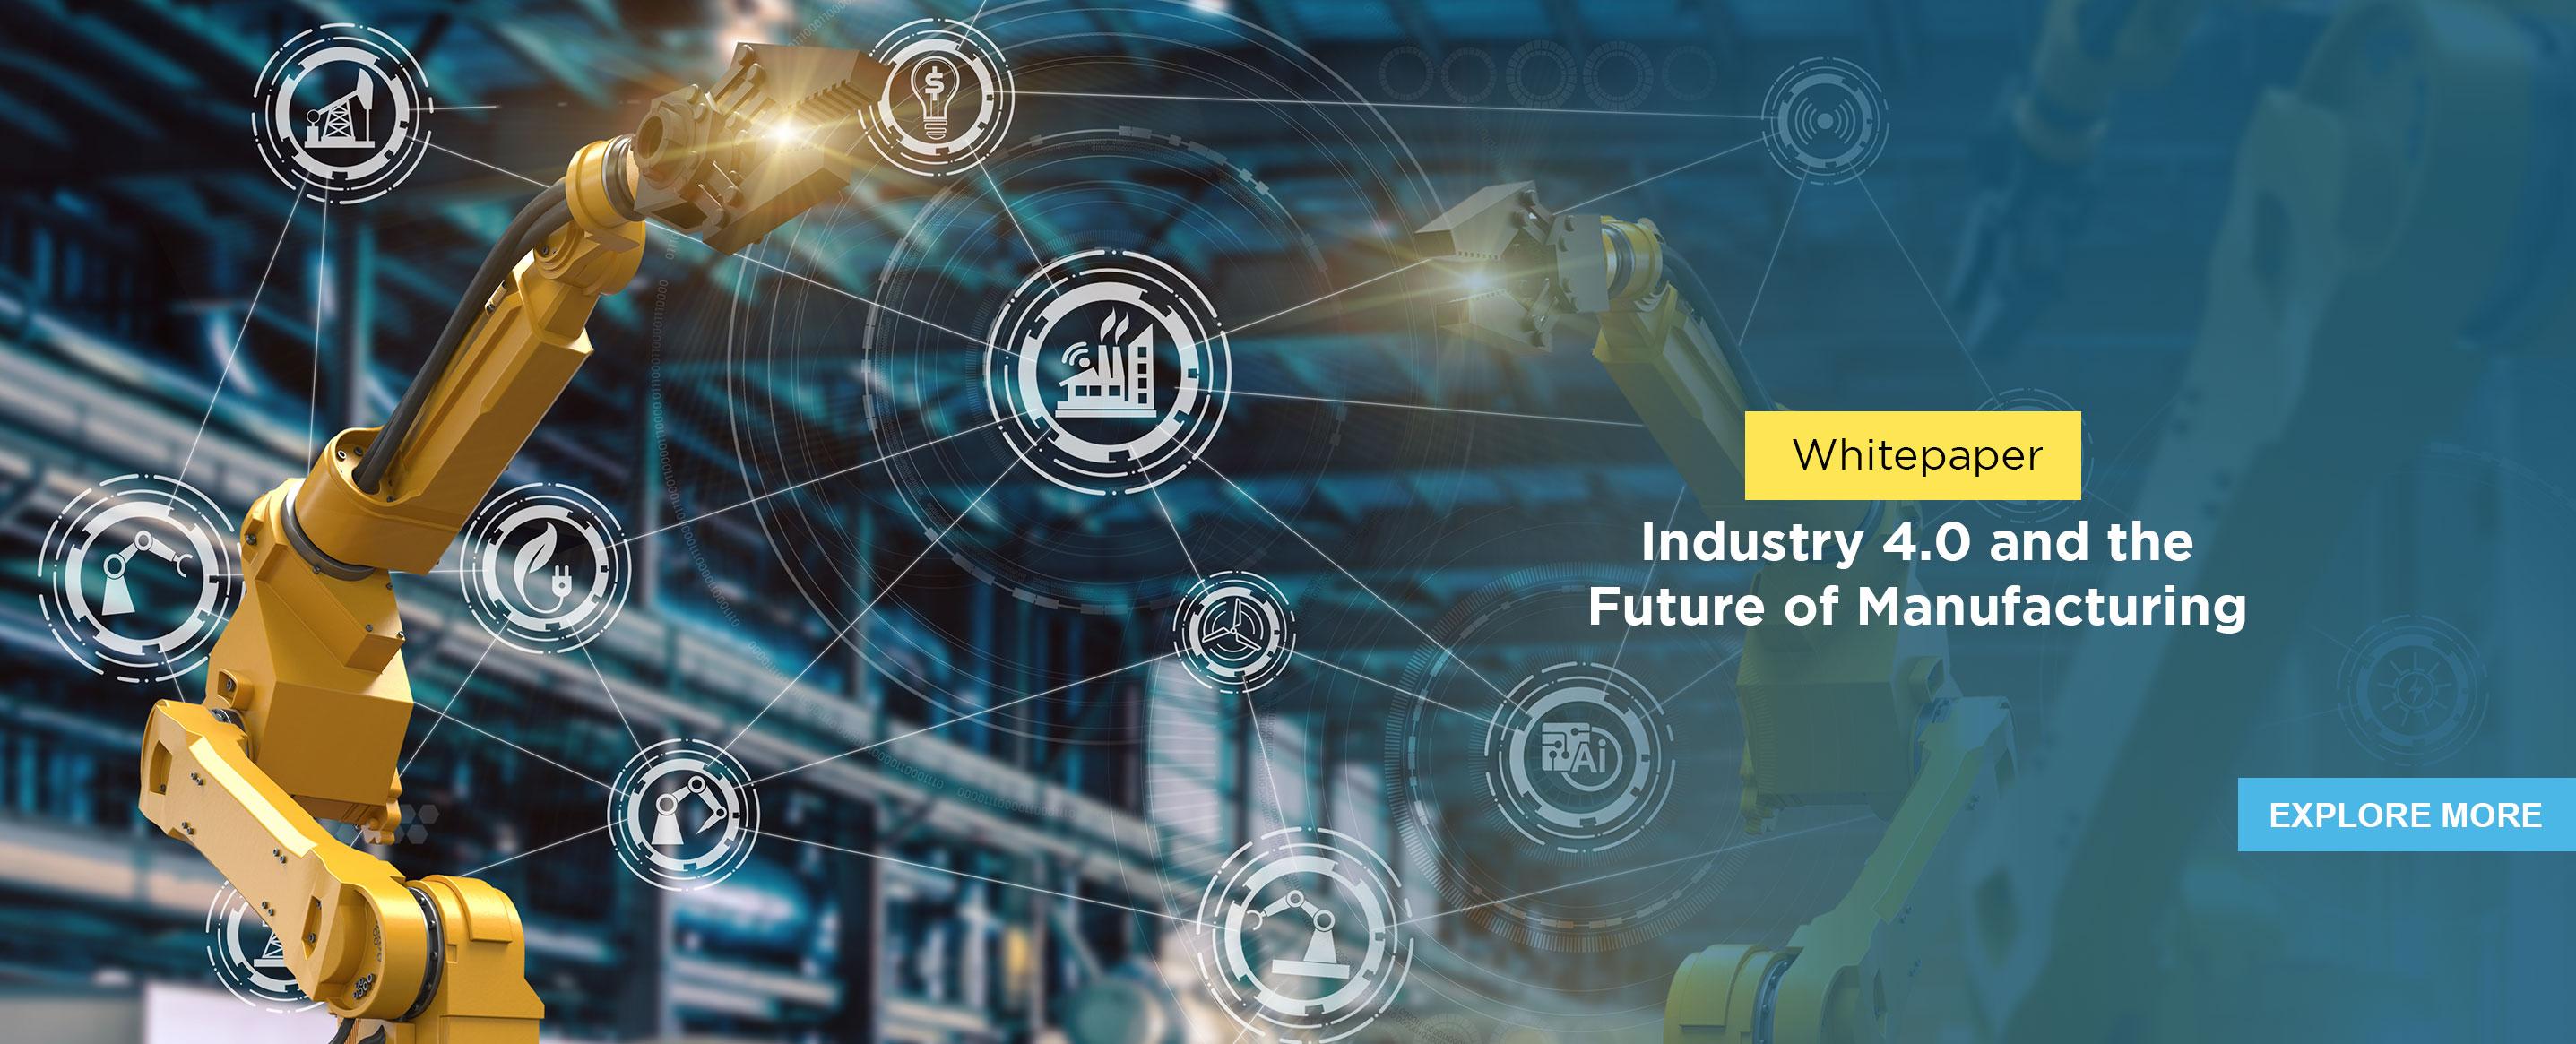 Industry 4.0 and the Future of Manufacturing